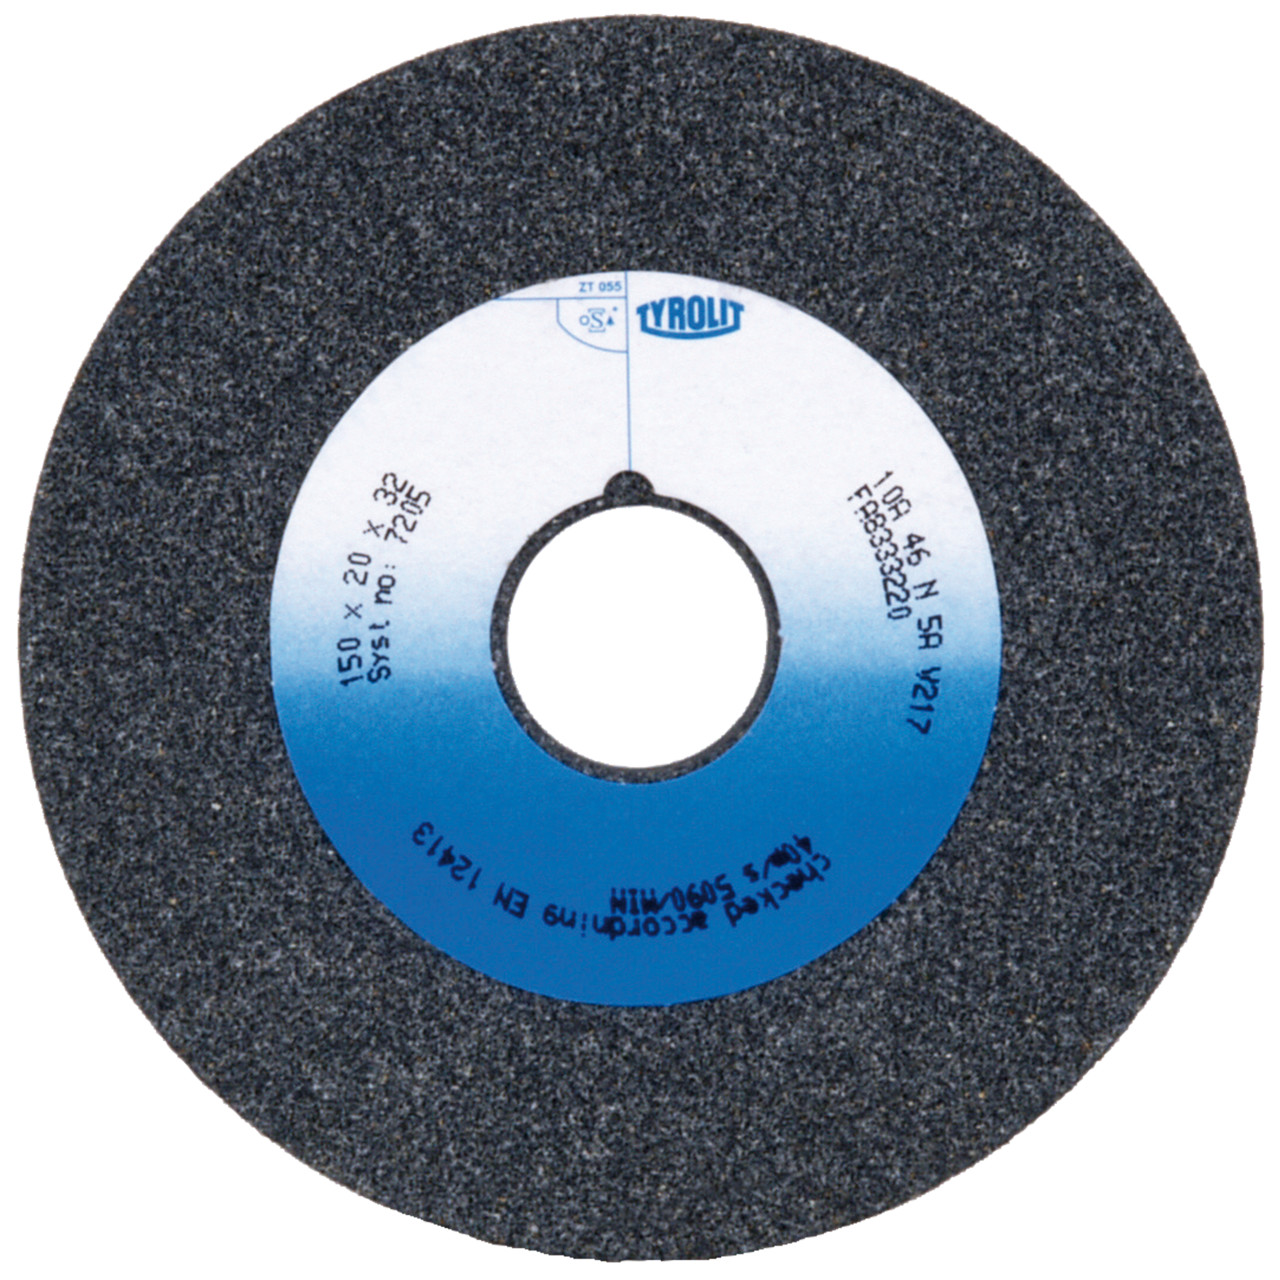 Tyrolit Conventional ceramic grinding discs DxDxH 250x32x32 For unalloyed and low-alloy steels, shape: 1, Art. 664261